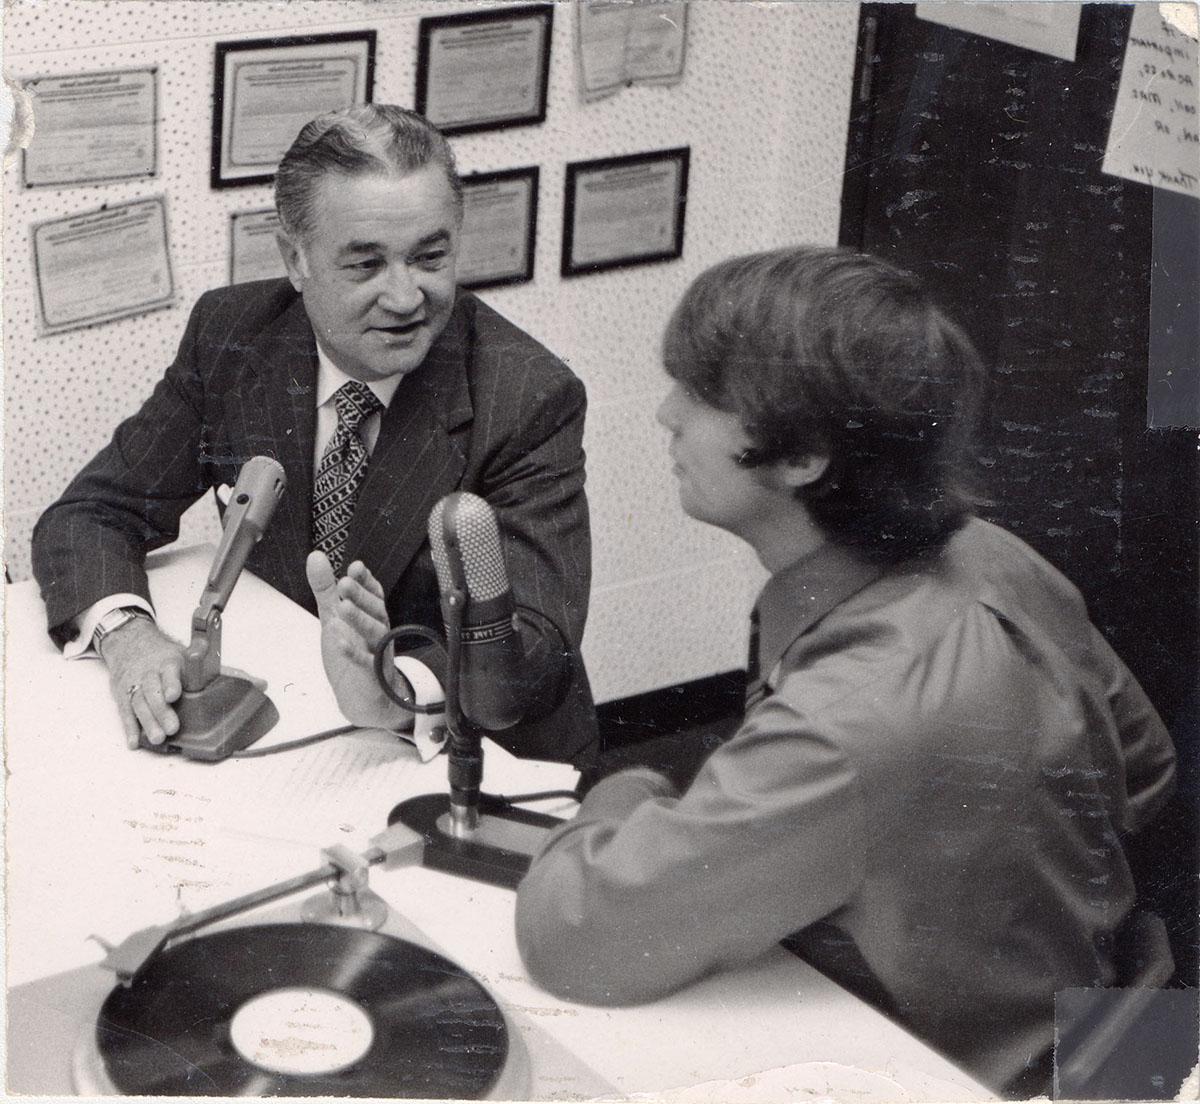 Robert Foster was instrumental in pushing for enhancements to Northwest's radio broadcast studios,